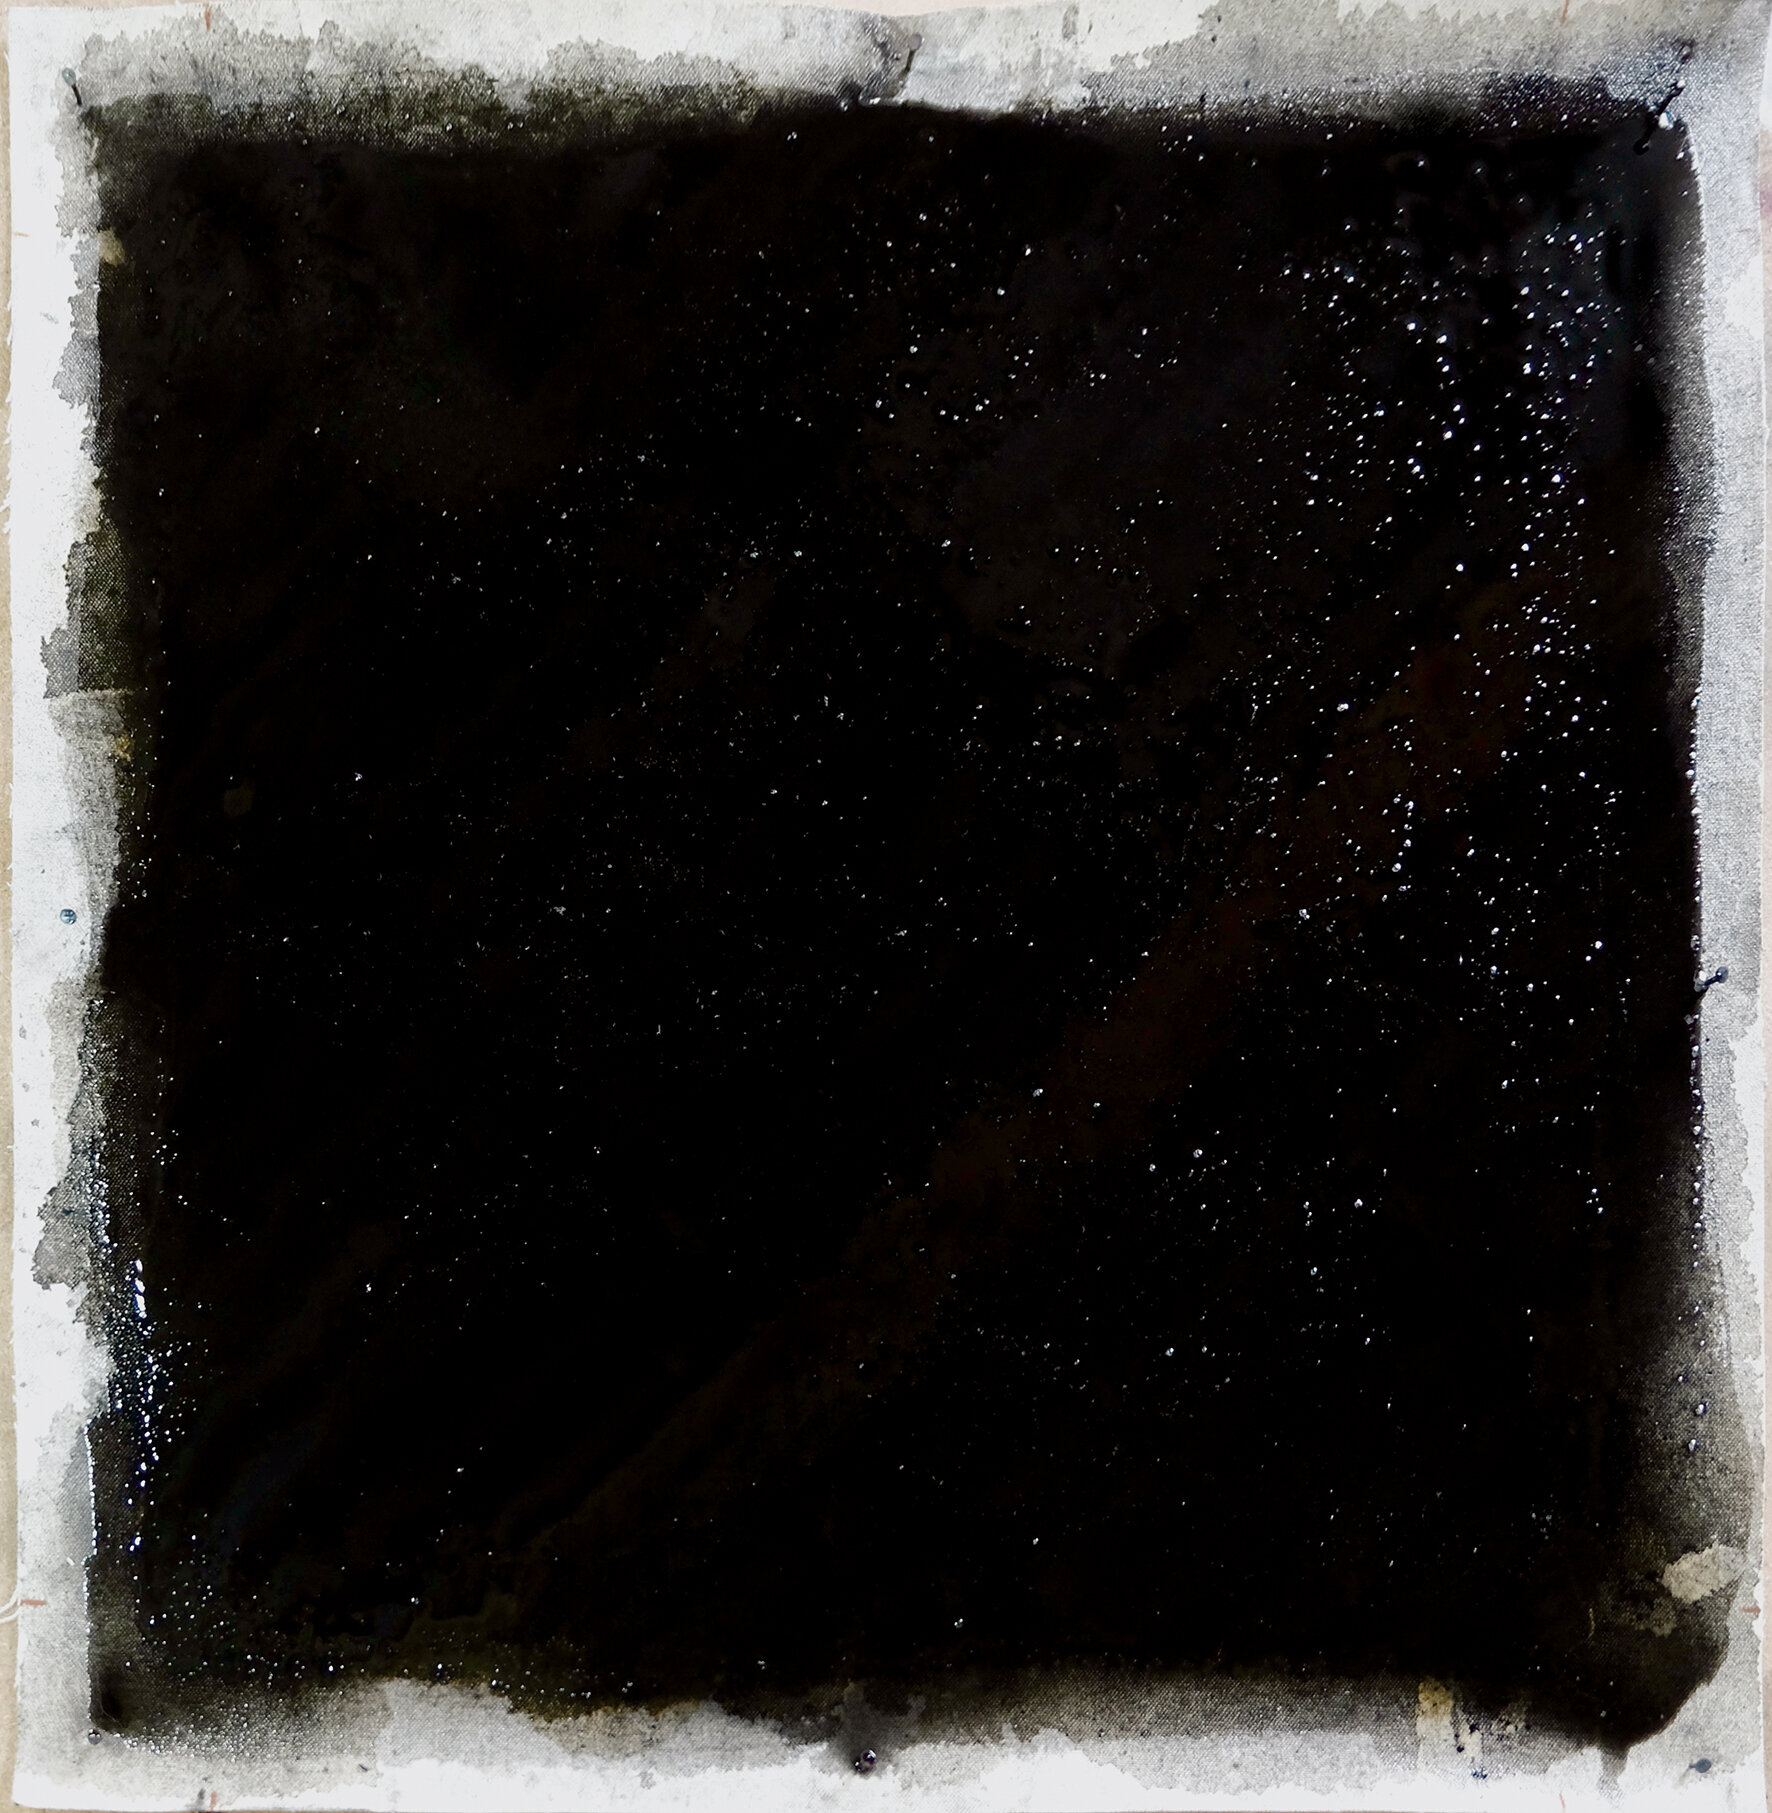 'Untitled' (Glossy Black Painting) (After Robert Rauschenberg) 1951